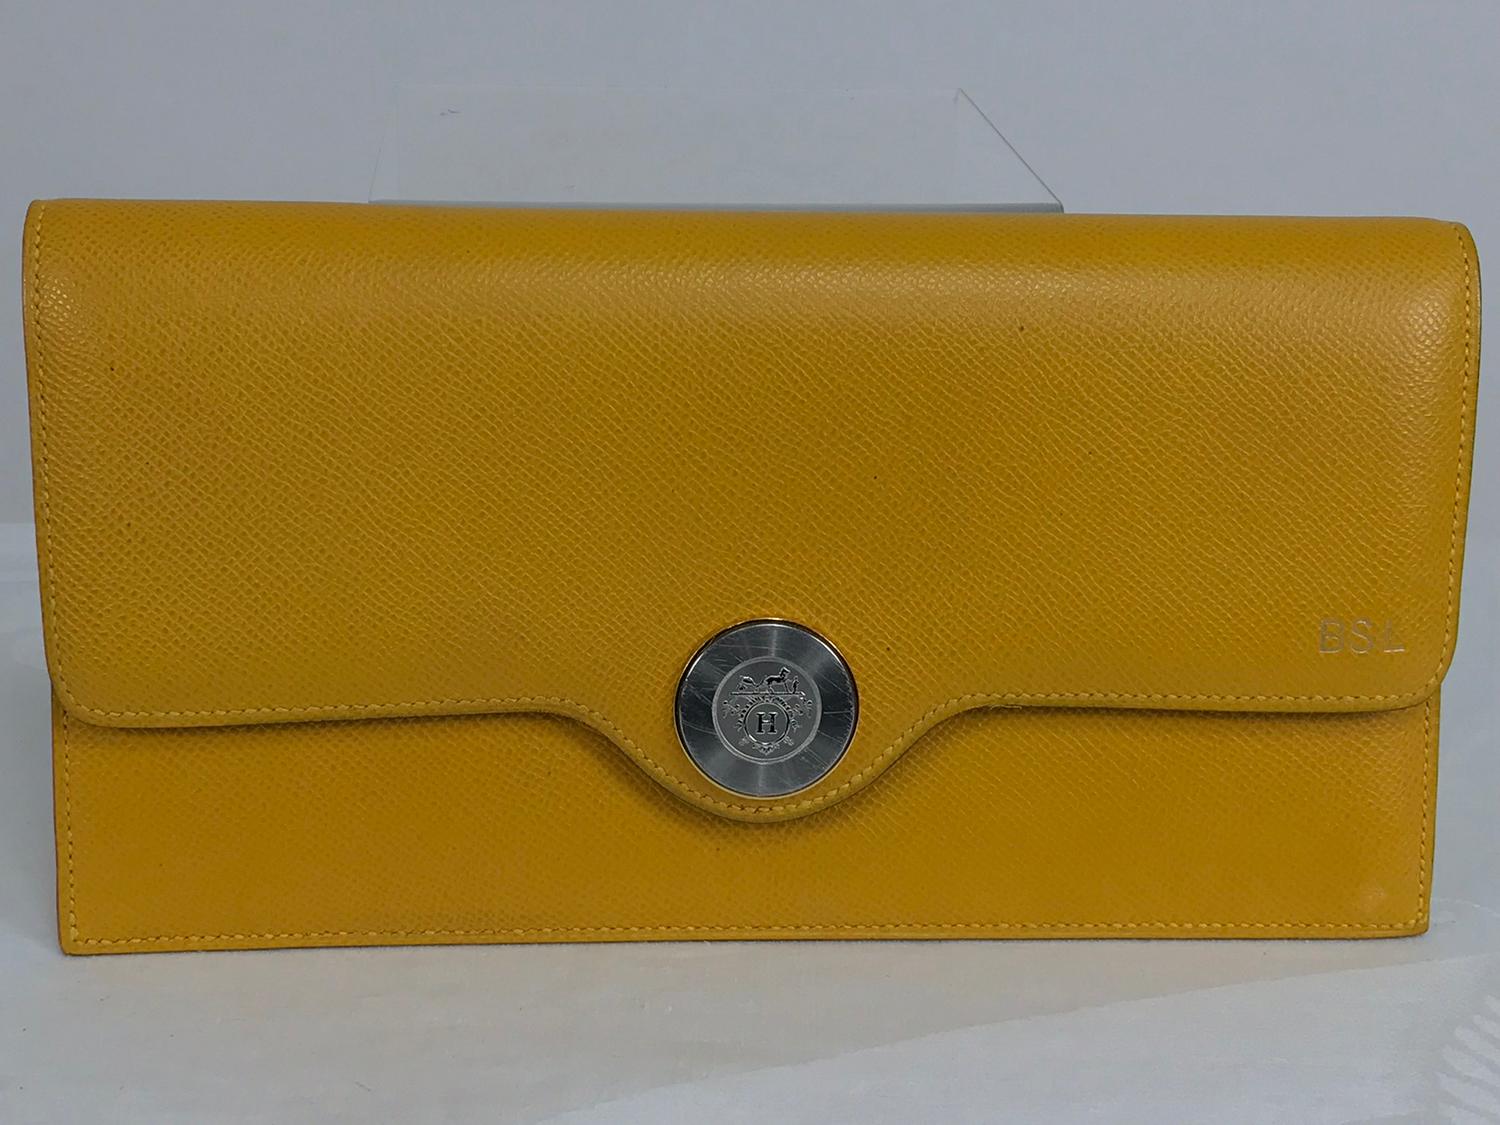 Hermes Mustard yellow pebbled leather clutch For Sale 1